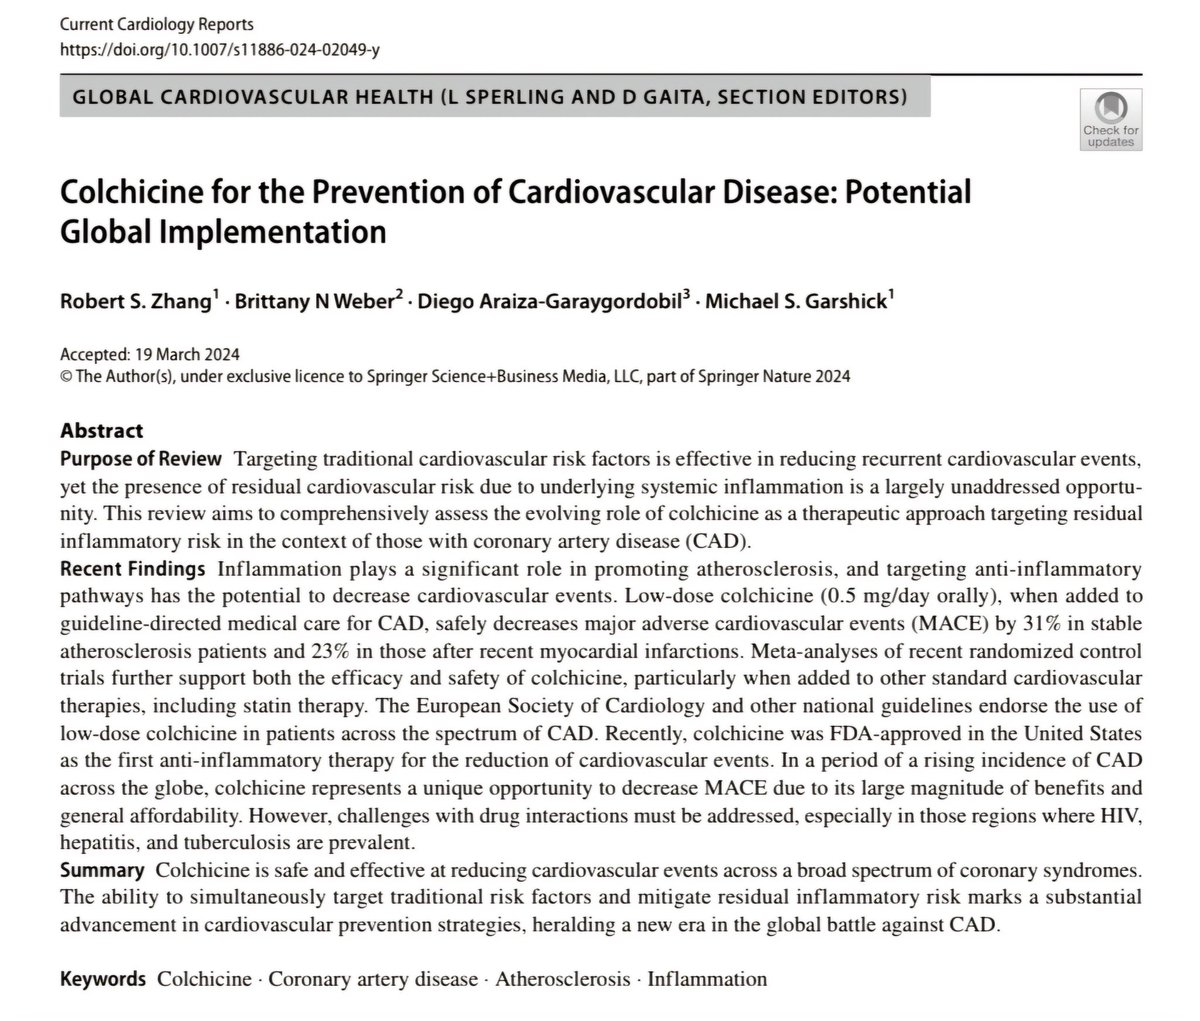 🔴 Colchicine for the Prevention of Cardiovascular Disease #2024Review 

link.springer.com/article/10.100…
#mitral #valve #prolapse #EHJ #cardiotwitter 
#MedEd #POCUS #CardioEd #CardioTwitter #medtwitter #cardiotwiteros #meded #Cardiology #MedTwitter #MedEd #Cardiotwitter  #CriticalCare